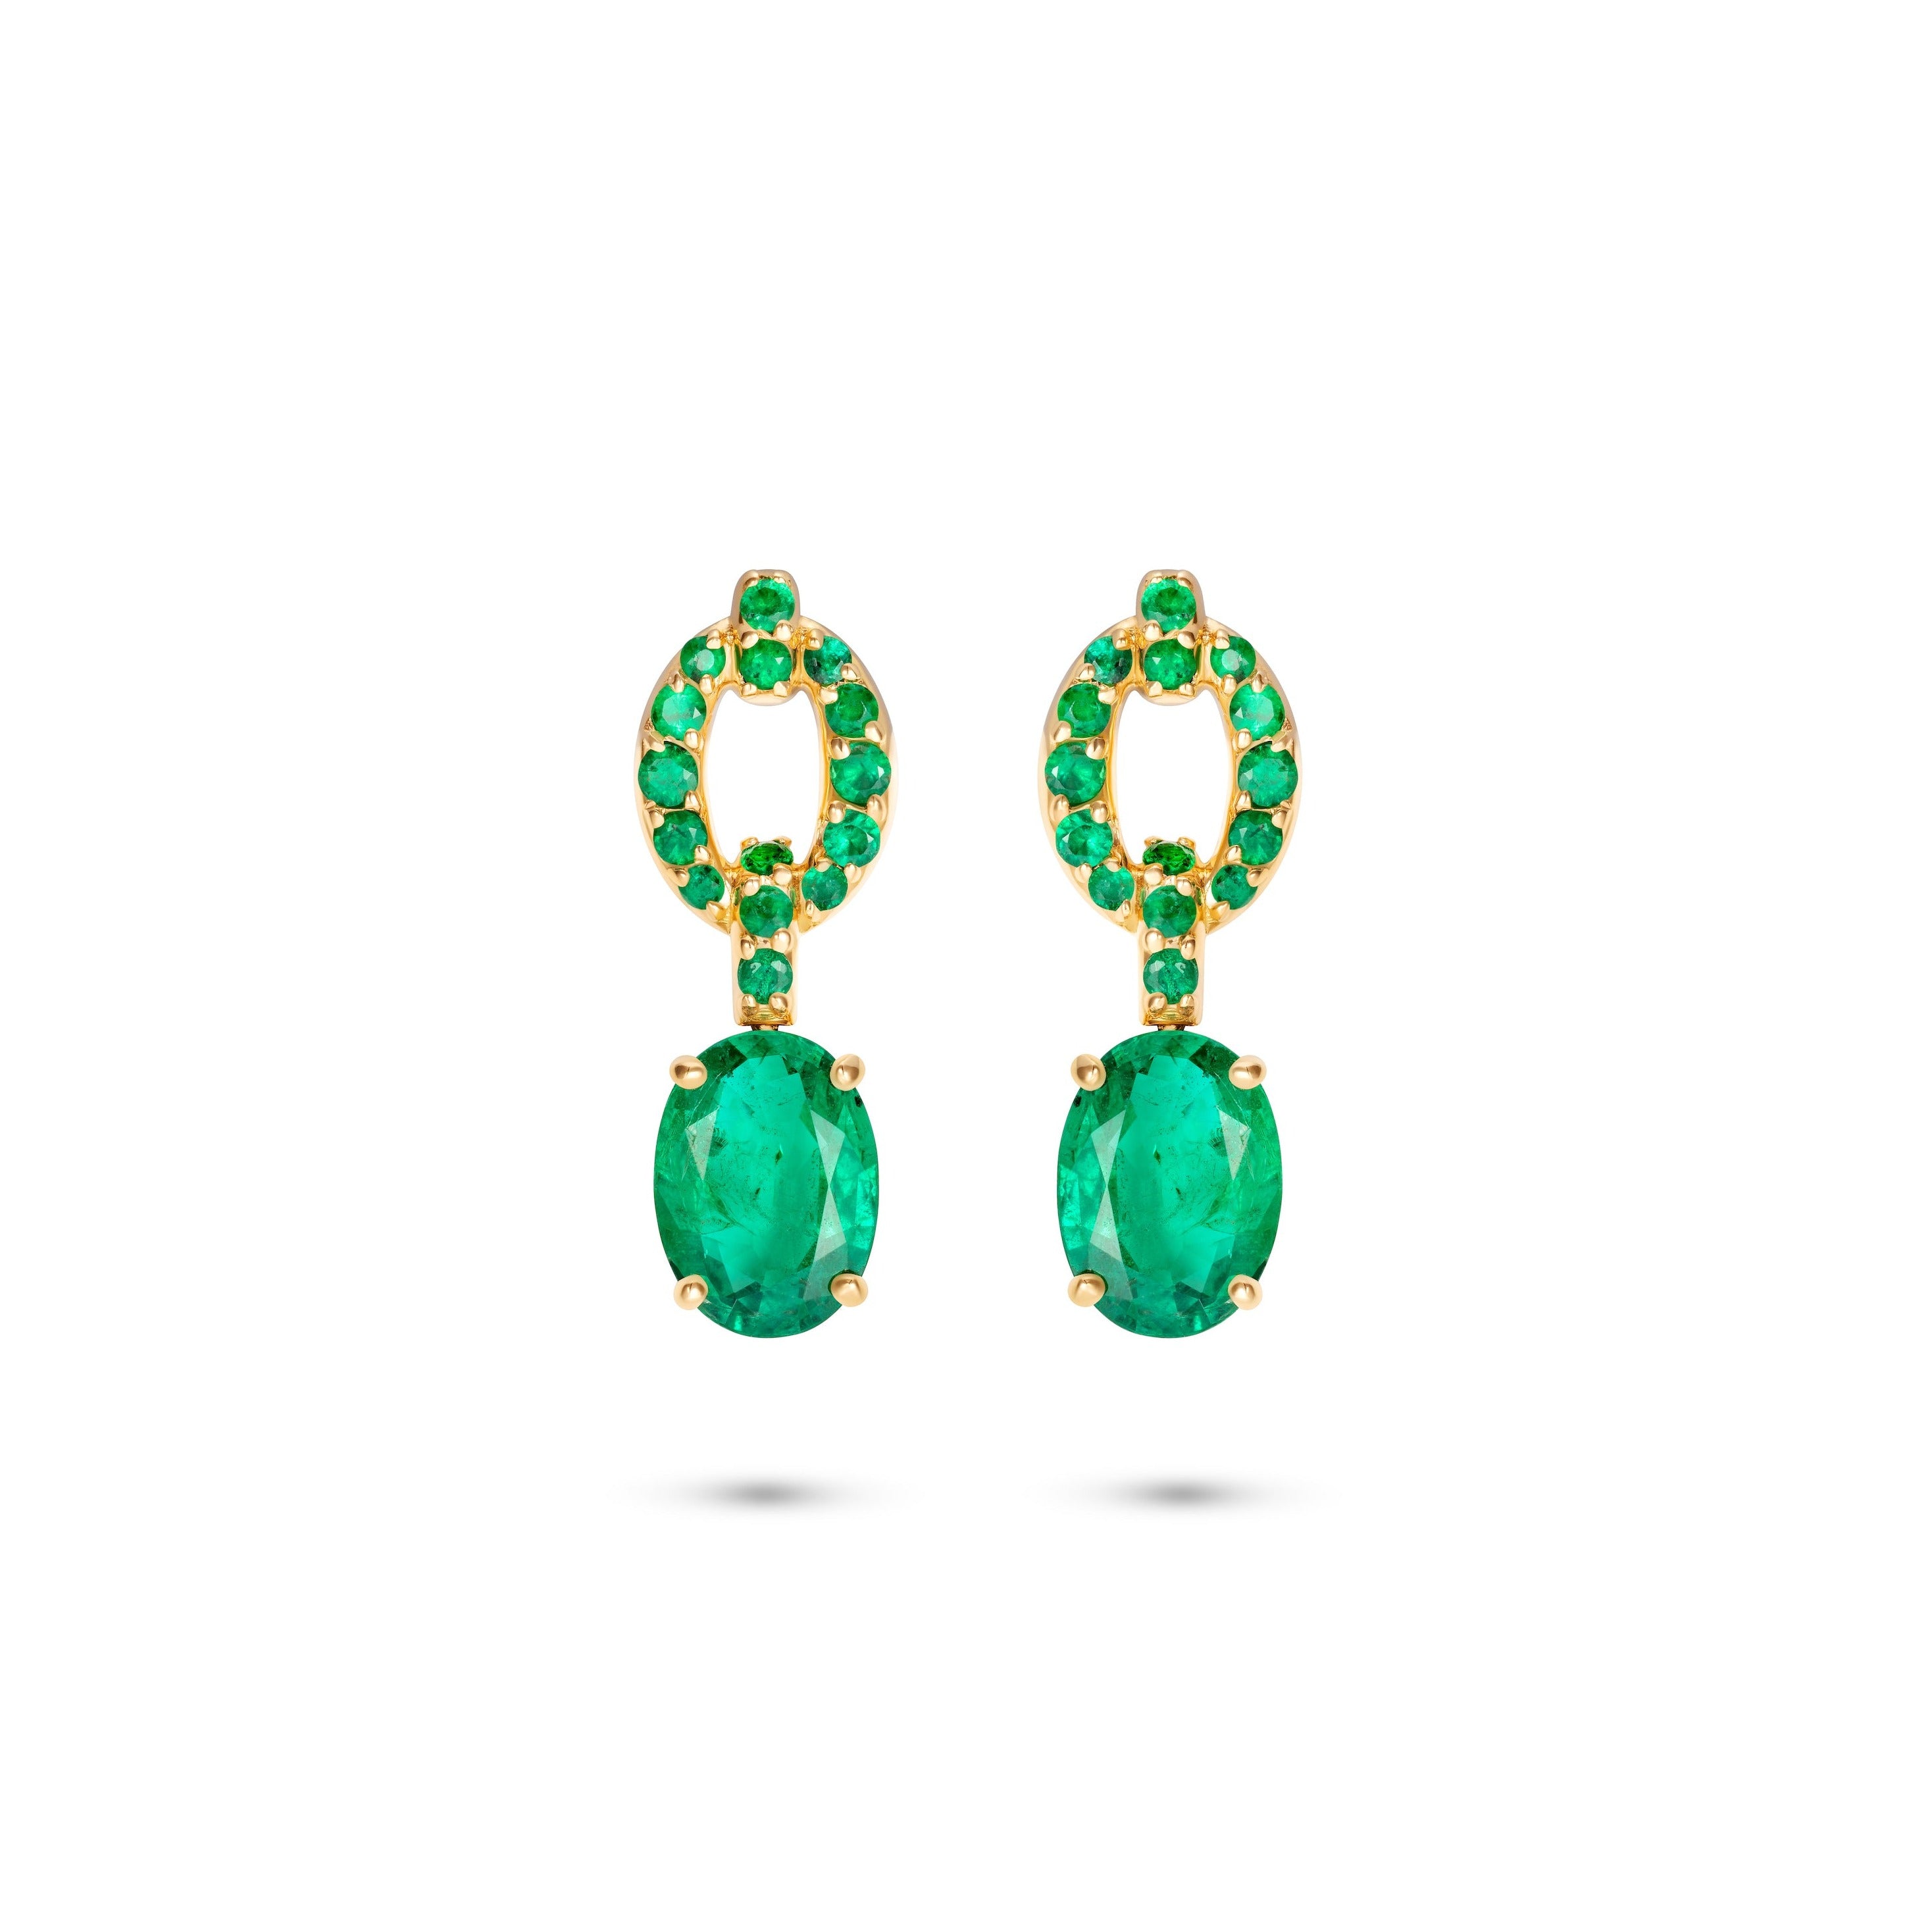 Catena Drop Oval Emerald and Pave Earrings